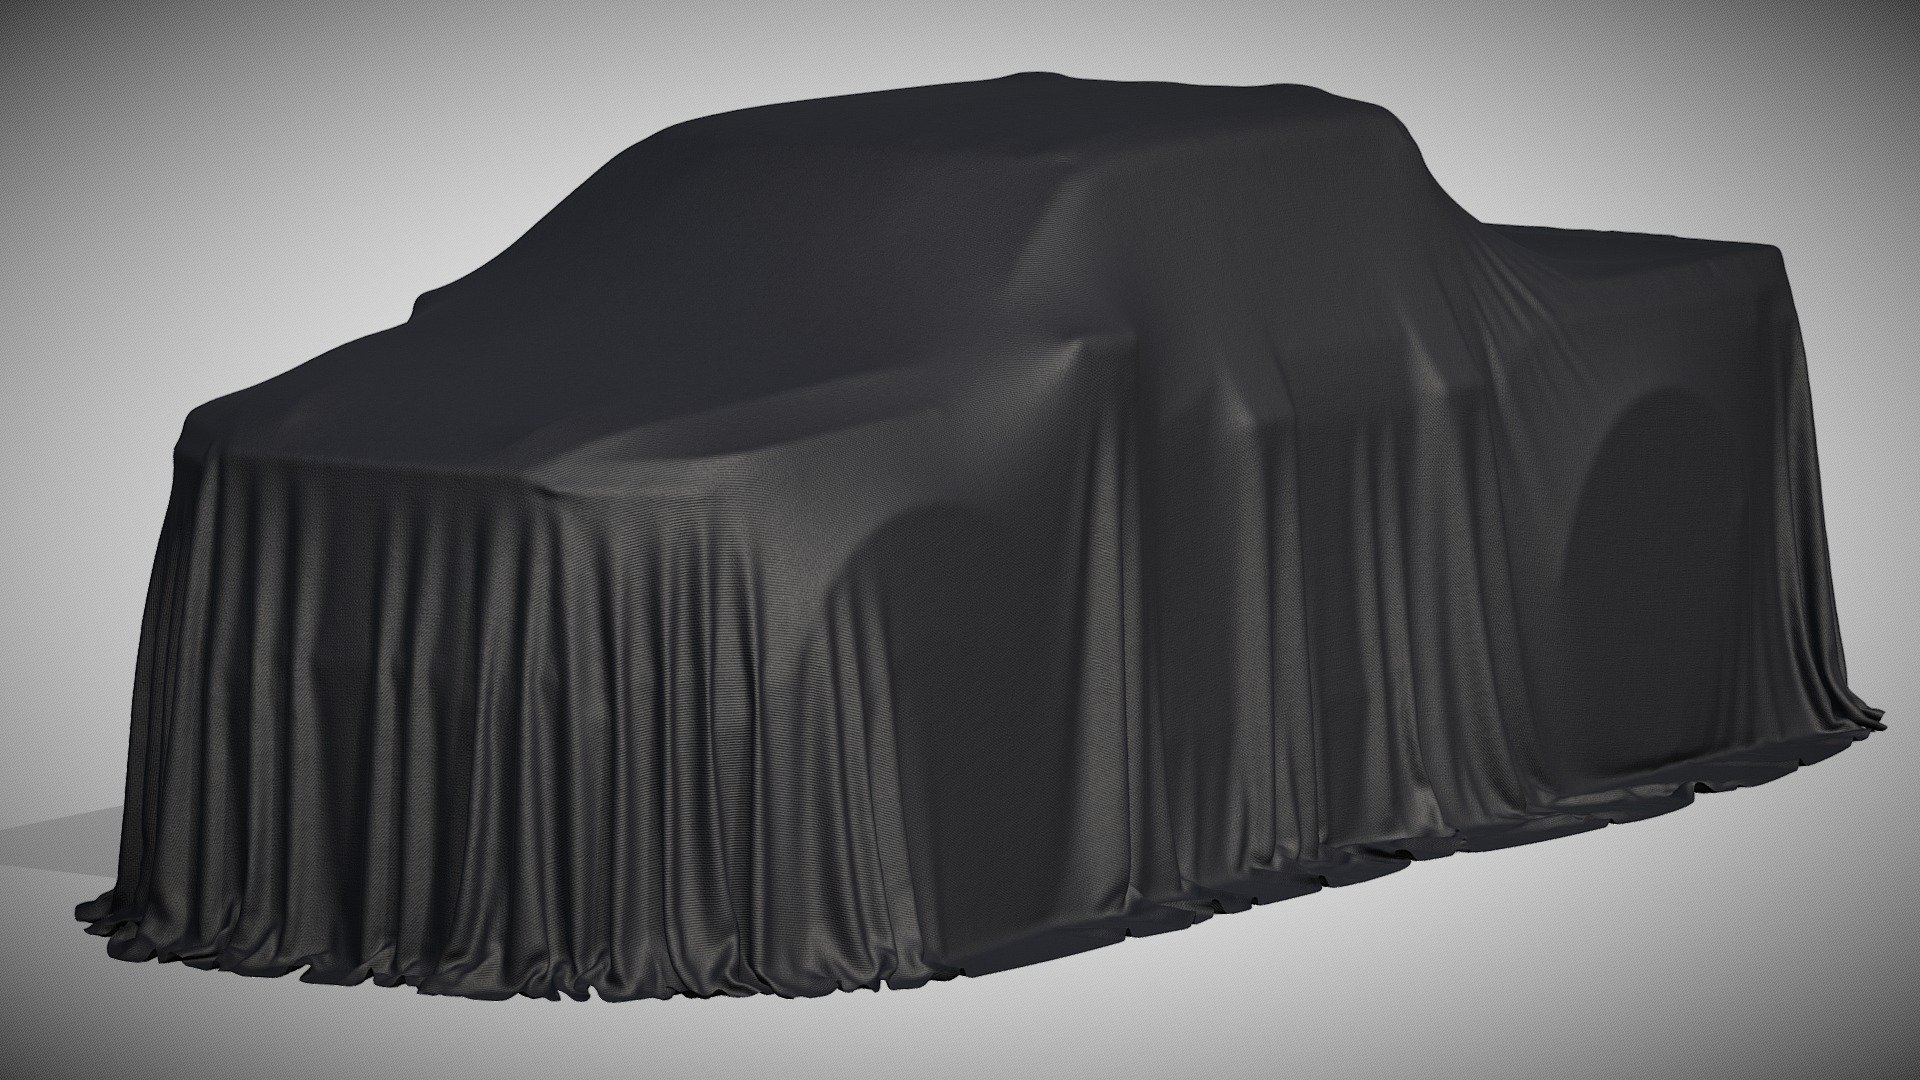 Car Cover Pick-Up

Cover car an auto show traditional hide and reveal ceremony textile cover props. Cover car a manufacturer or dealer motor show traditional fabric cover drapery. For auto show ceremonies, car show ceremonies, manufacturing of the vehicles, unusual future cars, transportation of the future, modern vehicles, modern vehicles engineering, concepts or comfortable vehicles, car machinery, new car presentations, contemporary vehicles, and future auto transportation engineering documentary or educational projects.

Clean geometry Light weight model, yet completely detailed for HI-Res renders. Use for movies, Advertisements or games

Corona render and materials

All textures include in *.rar files

Lighting setup is not included in the file! - Car Cover Pick-Up - Buy Royalty Free 3D model by zifir3d 3d model